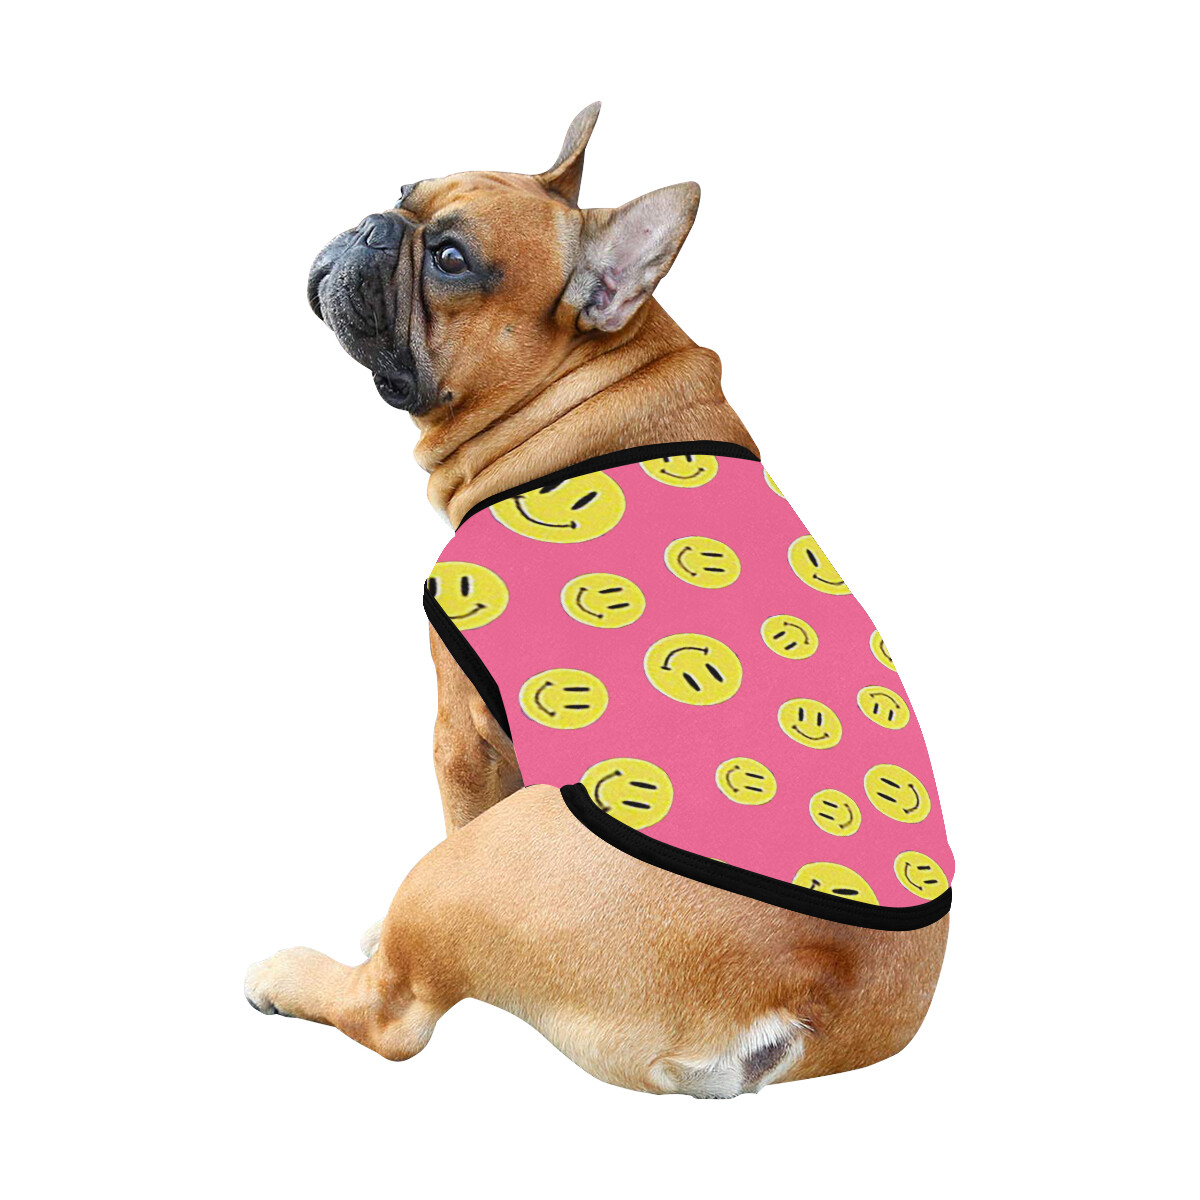 🐕 Happy faces Dog Tank Top, Dog shirt, Dog clothes, Gifts, front back print, 7 sizes XS to 3XL, dog t-shirt, dog t-shirt, dog gift, strawberry